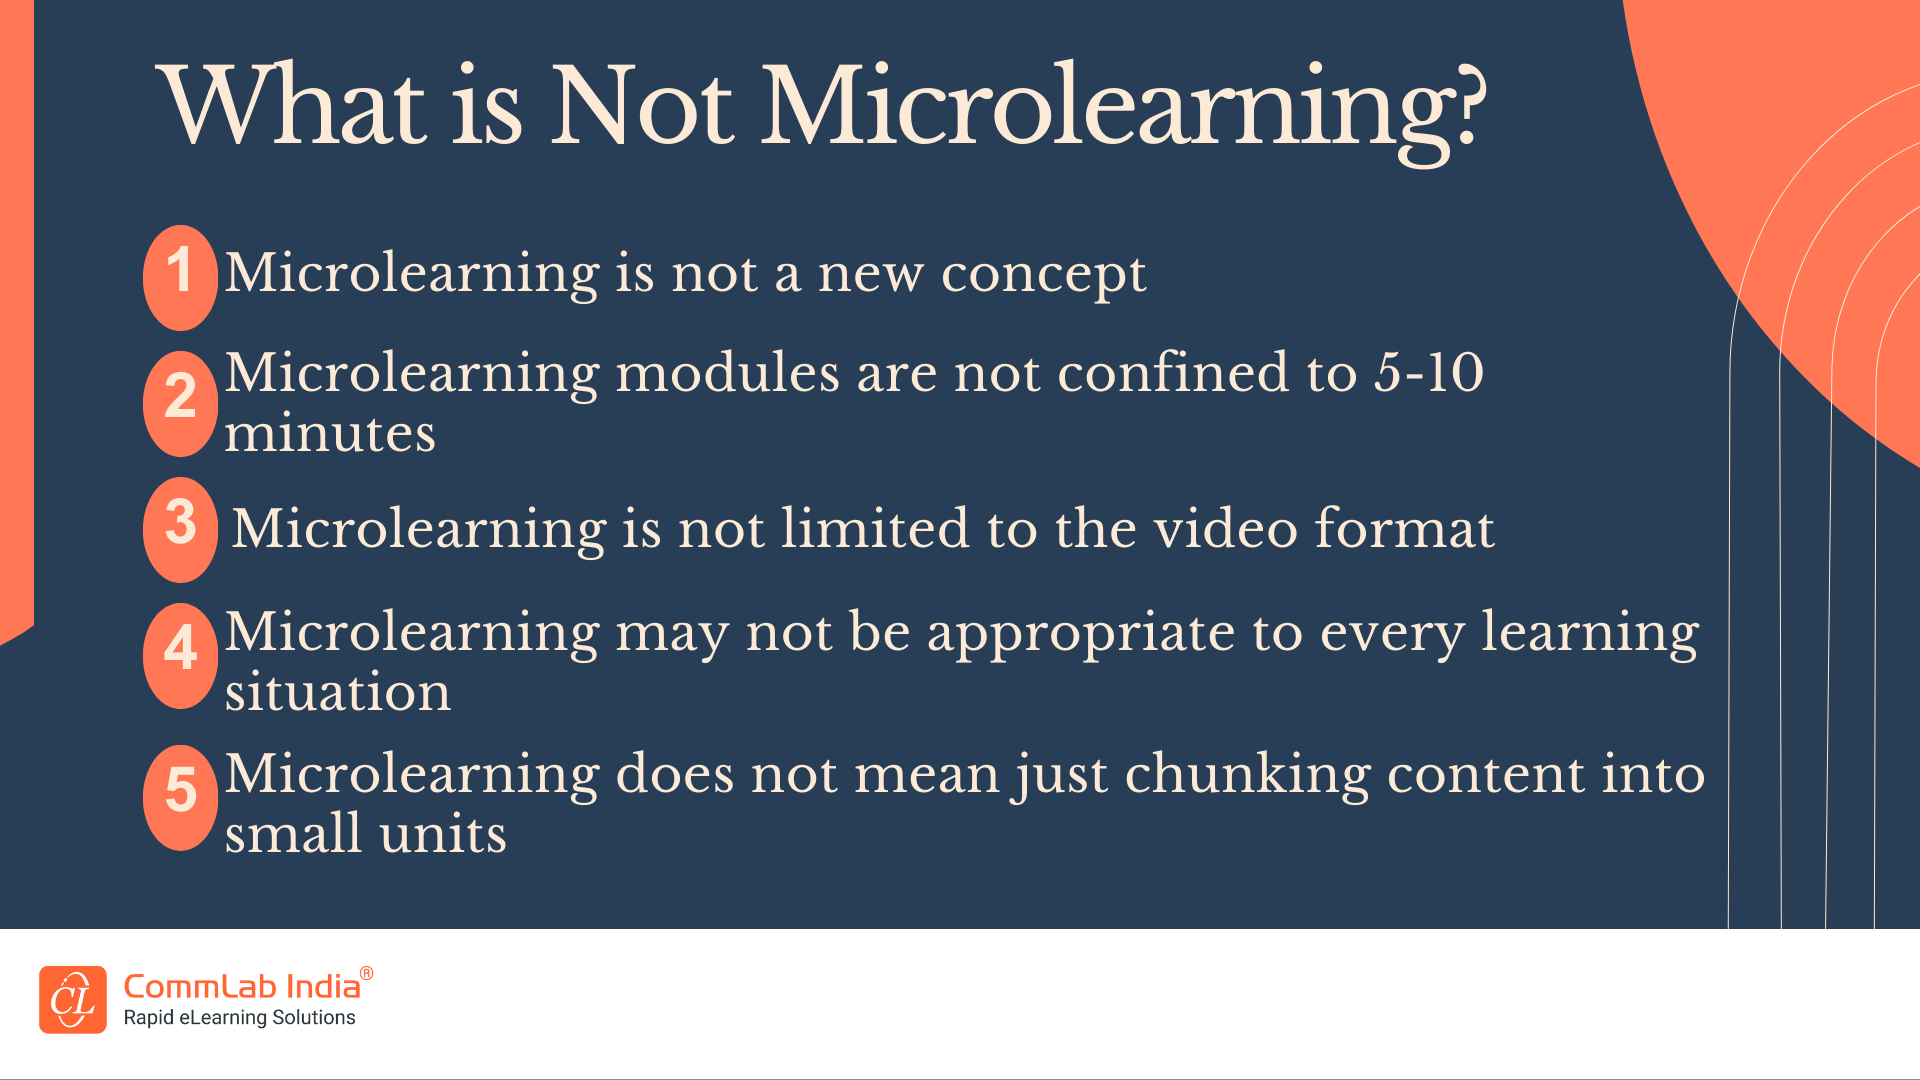 What is Not Microlearning